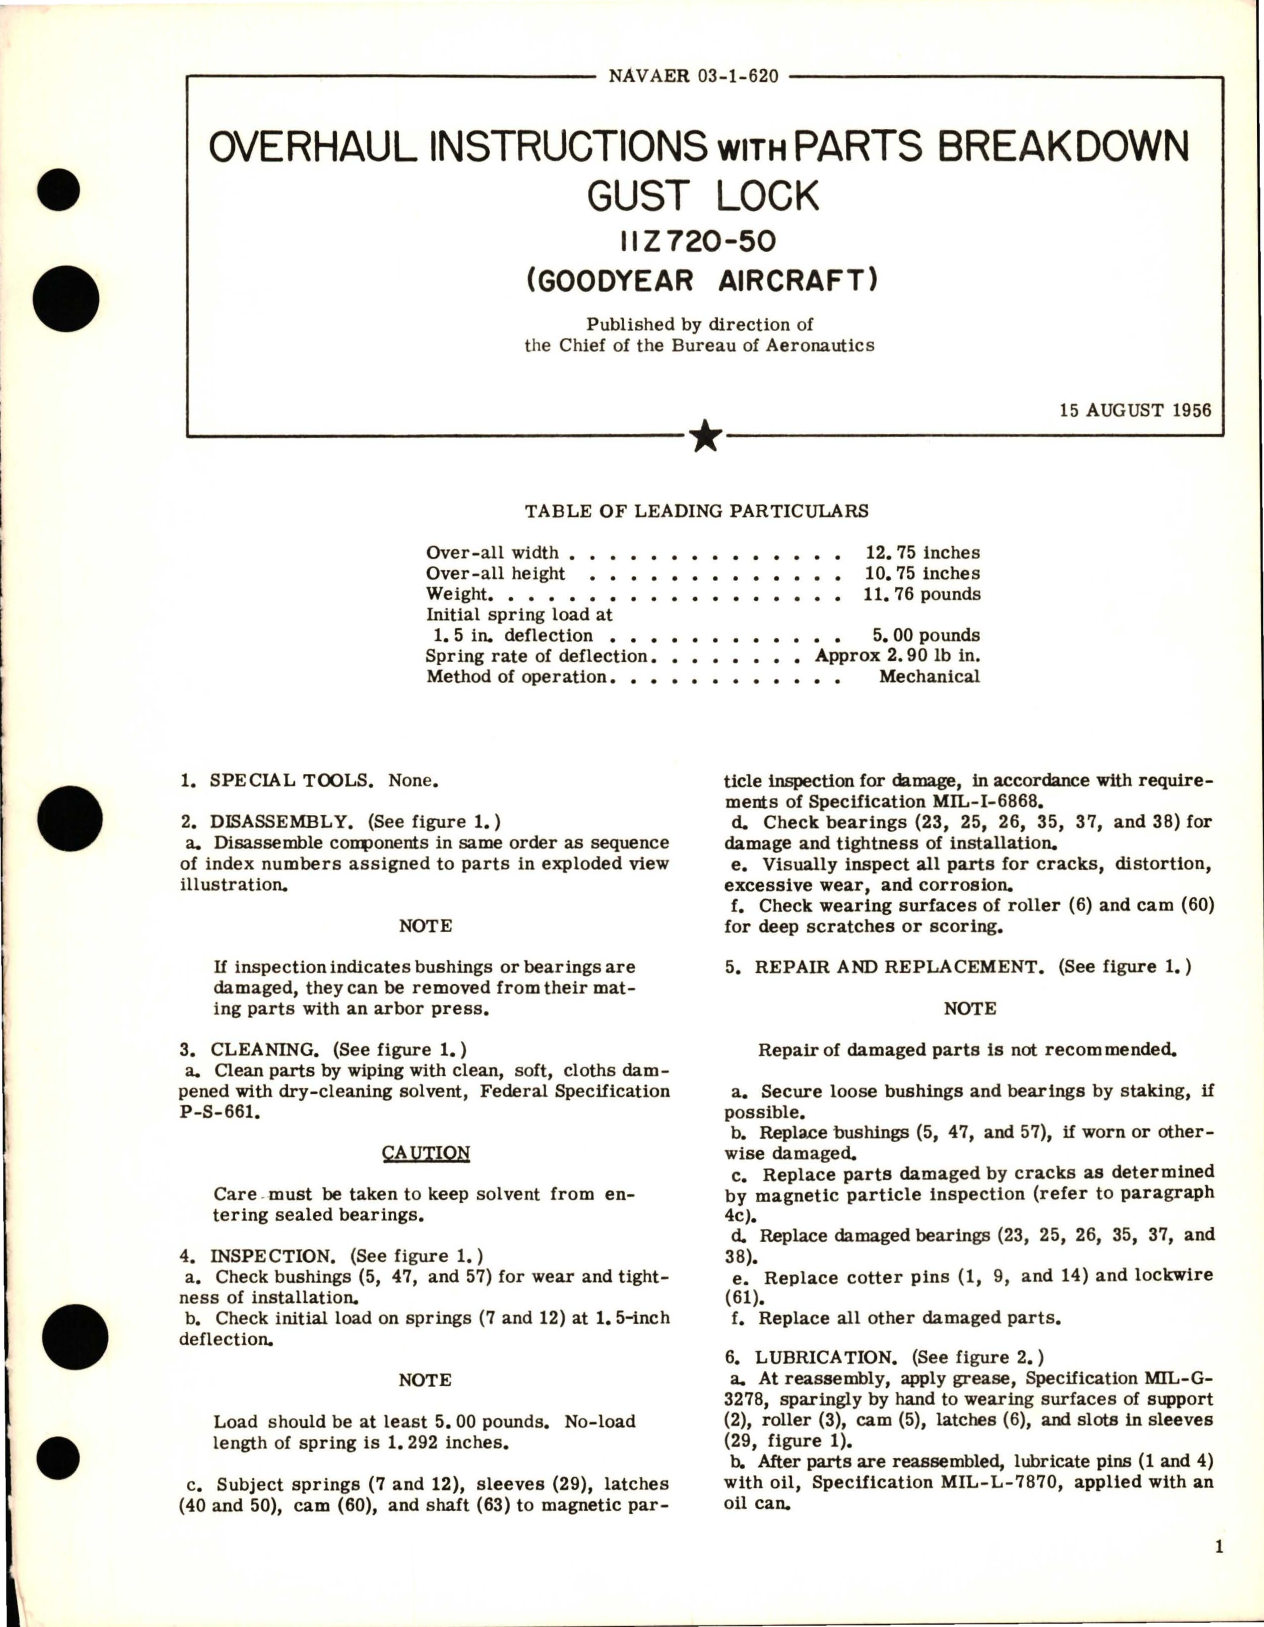 Sample page 1 from AirCorps Library document: Overhaul Instructions with Parts Breakdown for Gust Lock - 11Z720-50